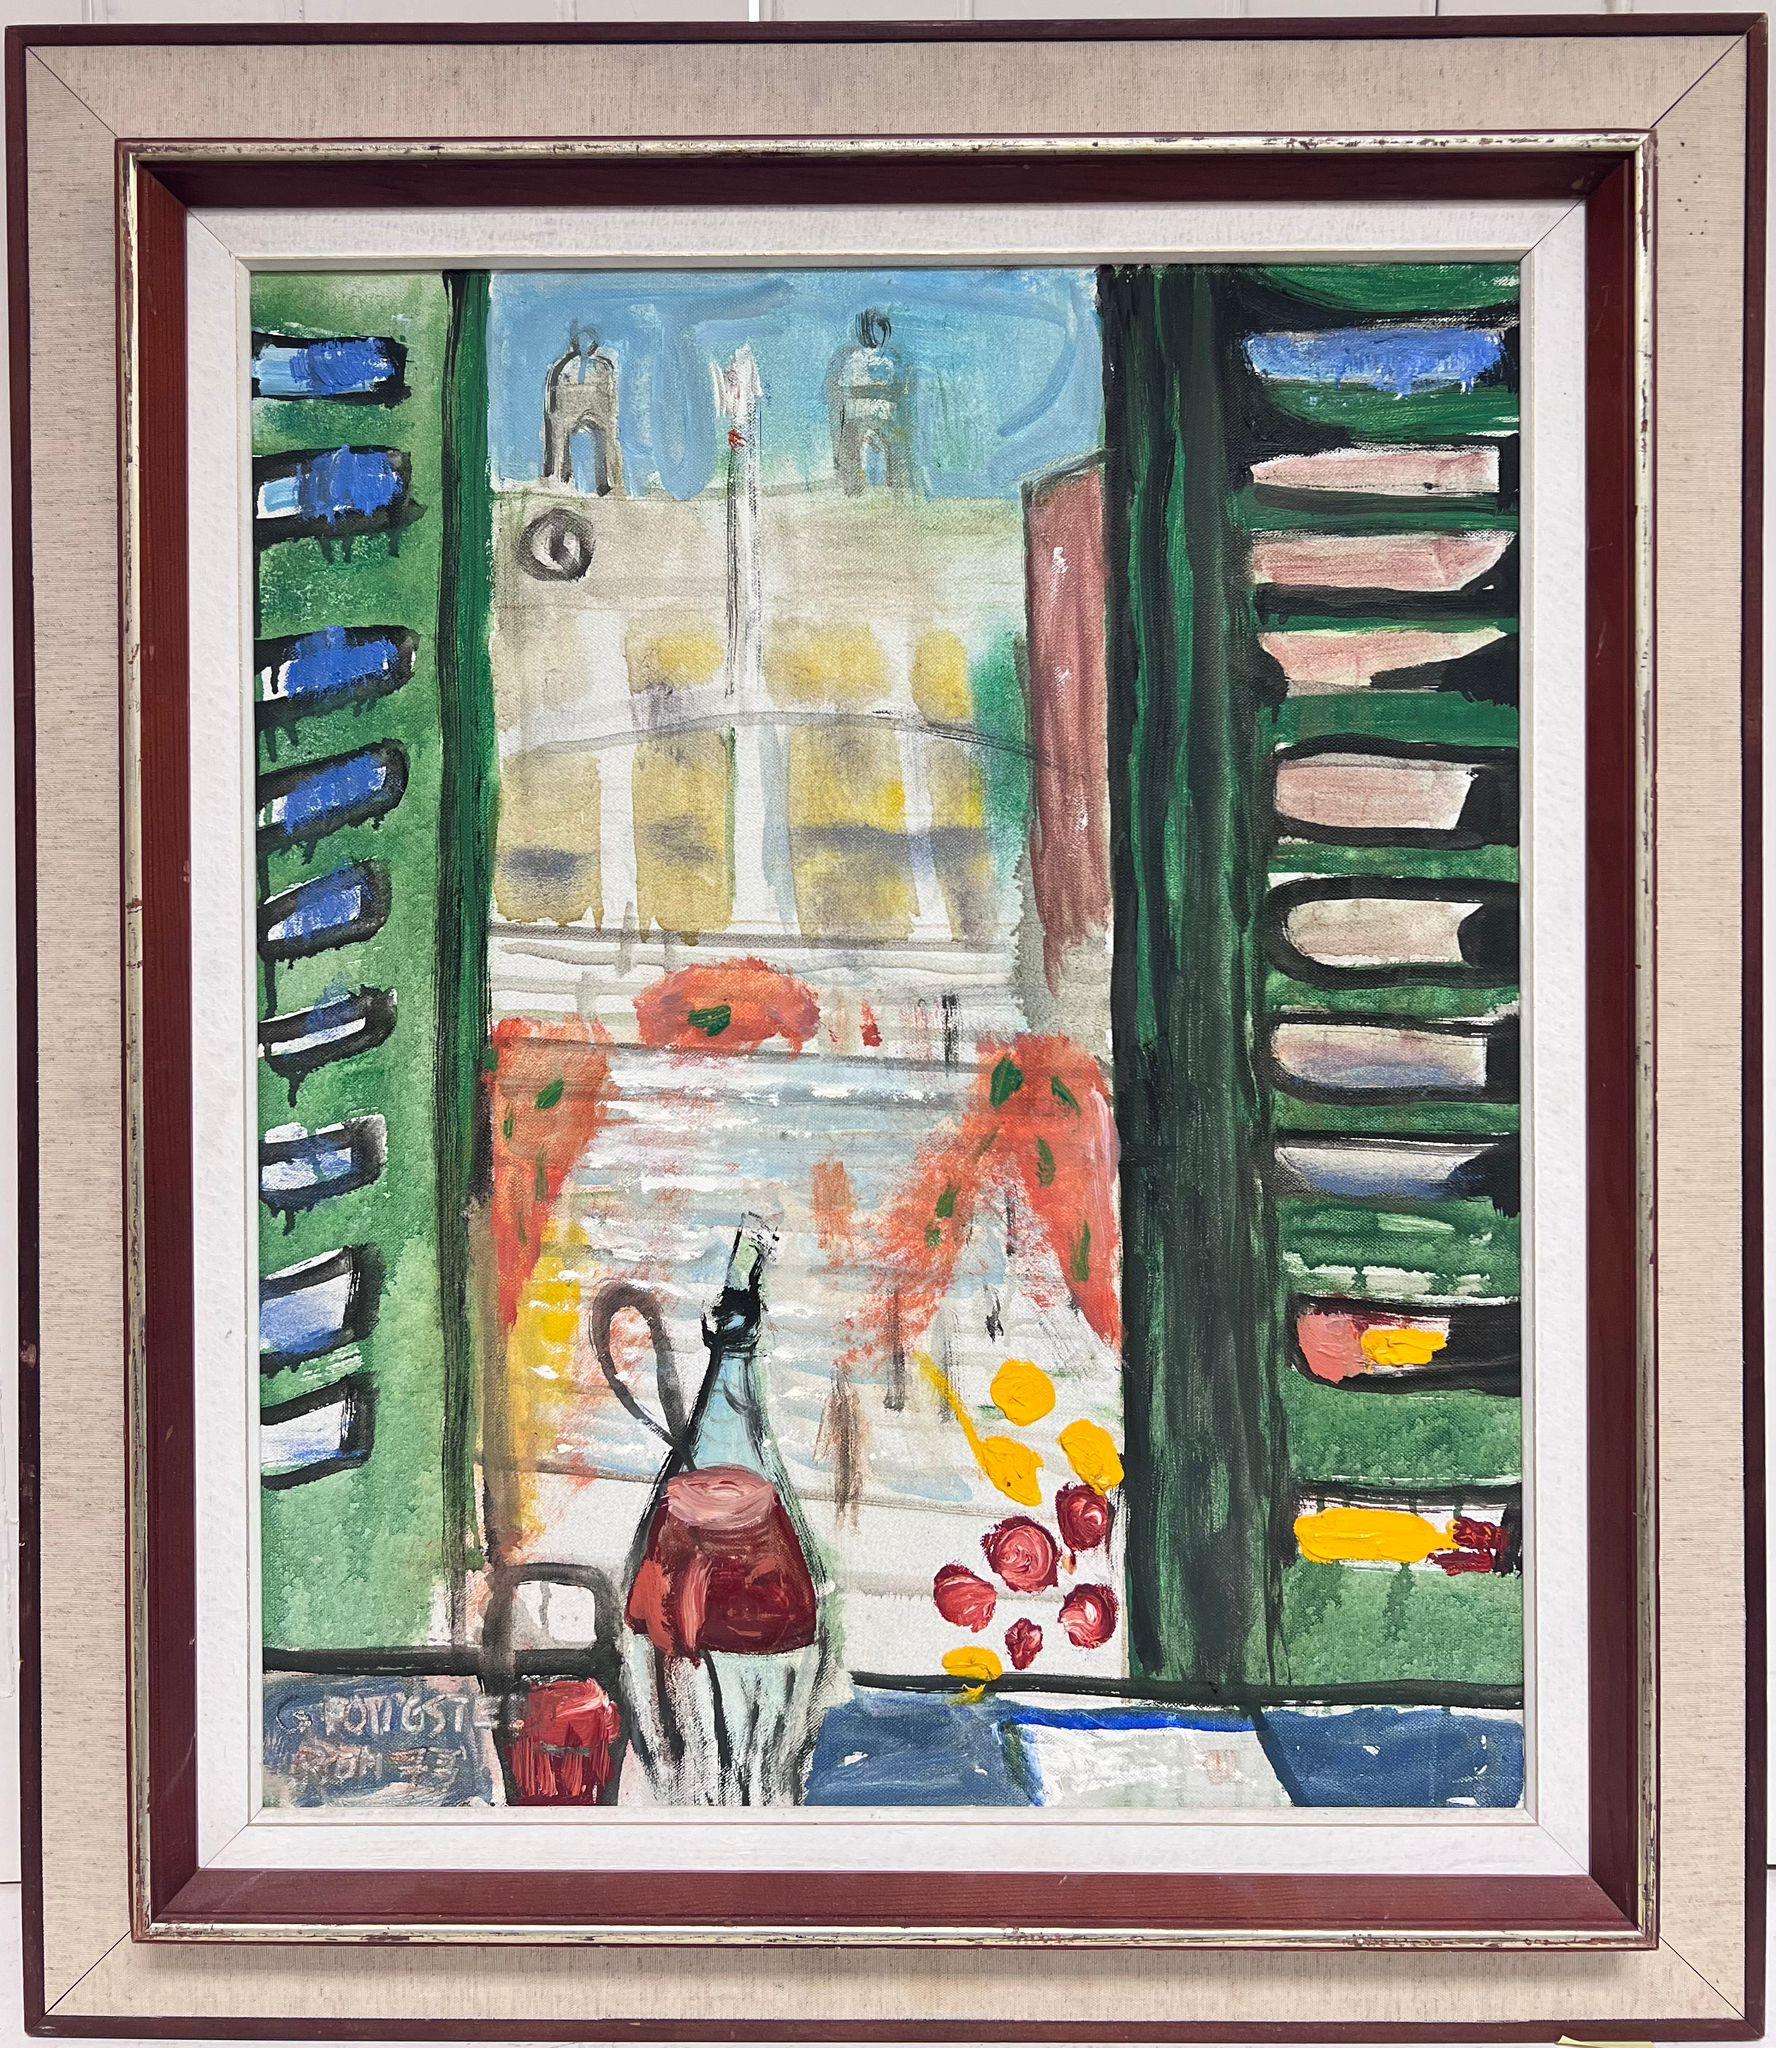 https://a.1stdibscdn.com/follower-of-henri-matisse-paintings-green-shutters-view-from-window-view-over-rooftops-20th-century-french-oil-for-sale/a_5093/a_127629821690293481924/WhatsApp_Image_2023_07_25_at_12_21_50_PM_master.jpeg